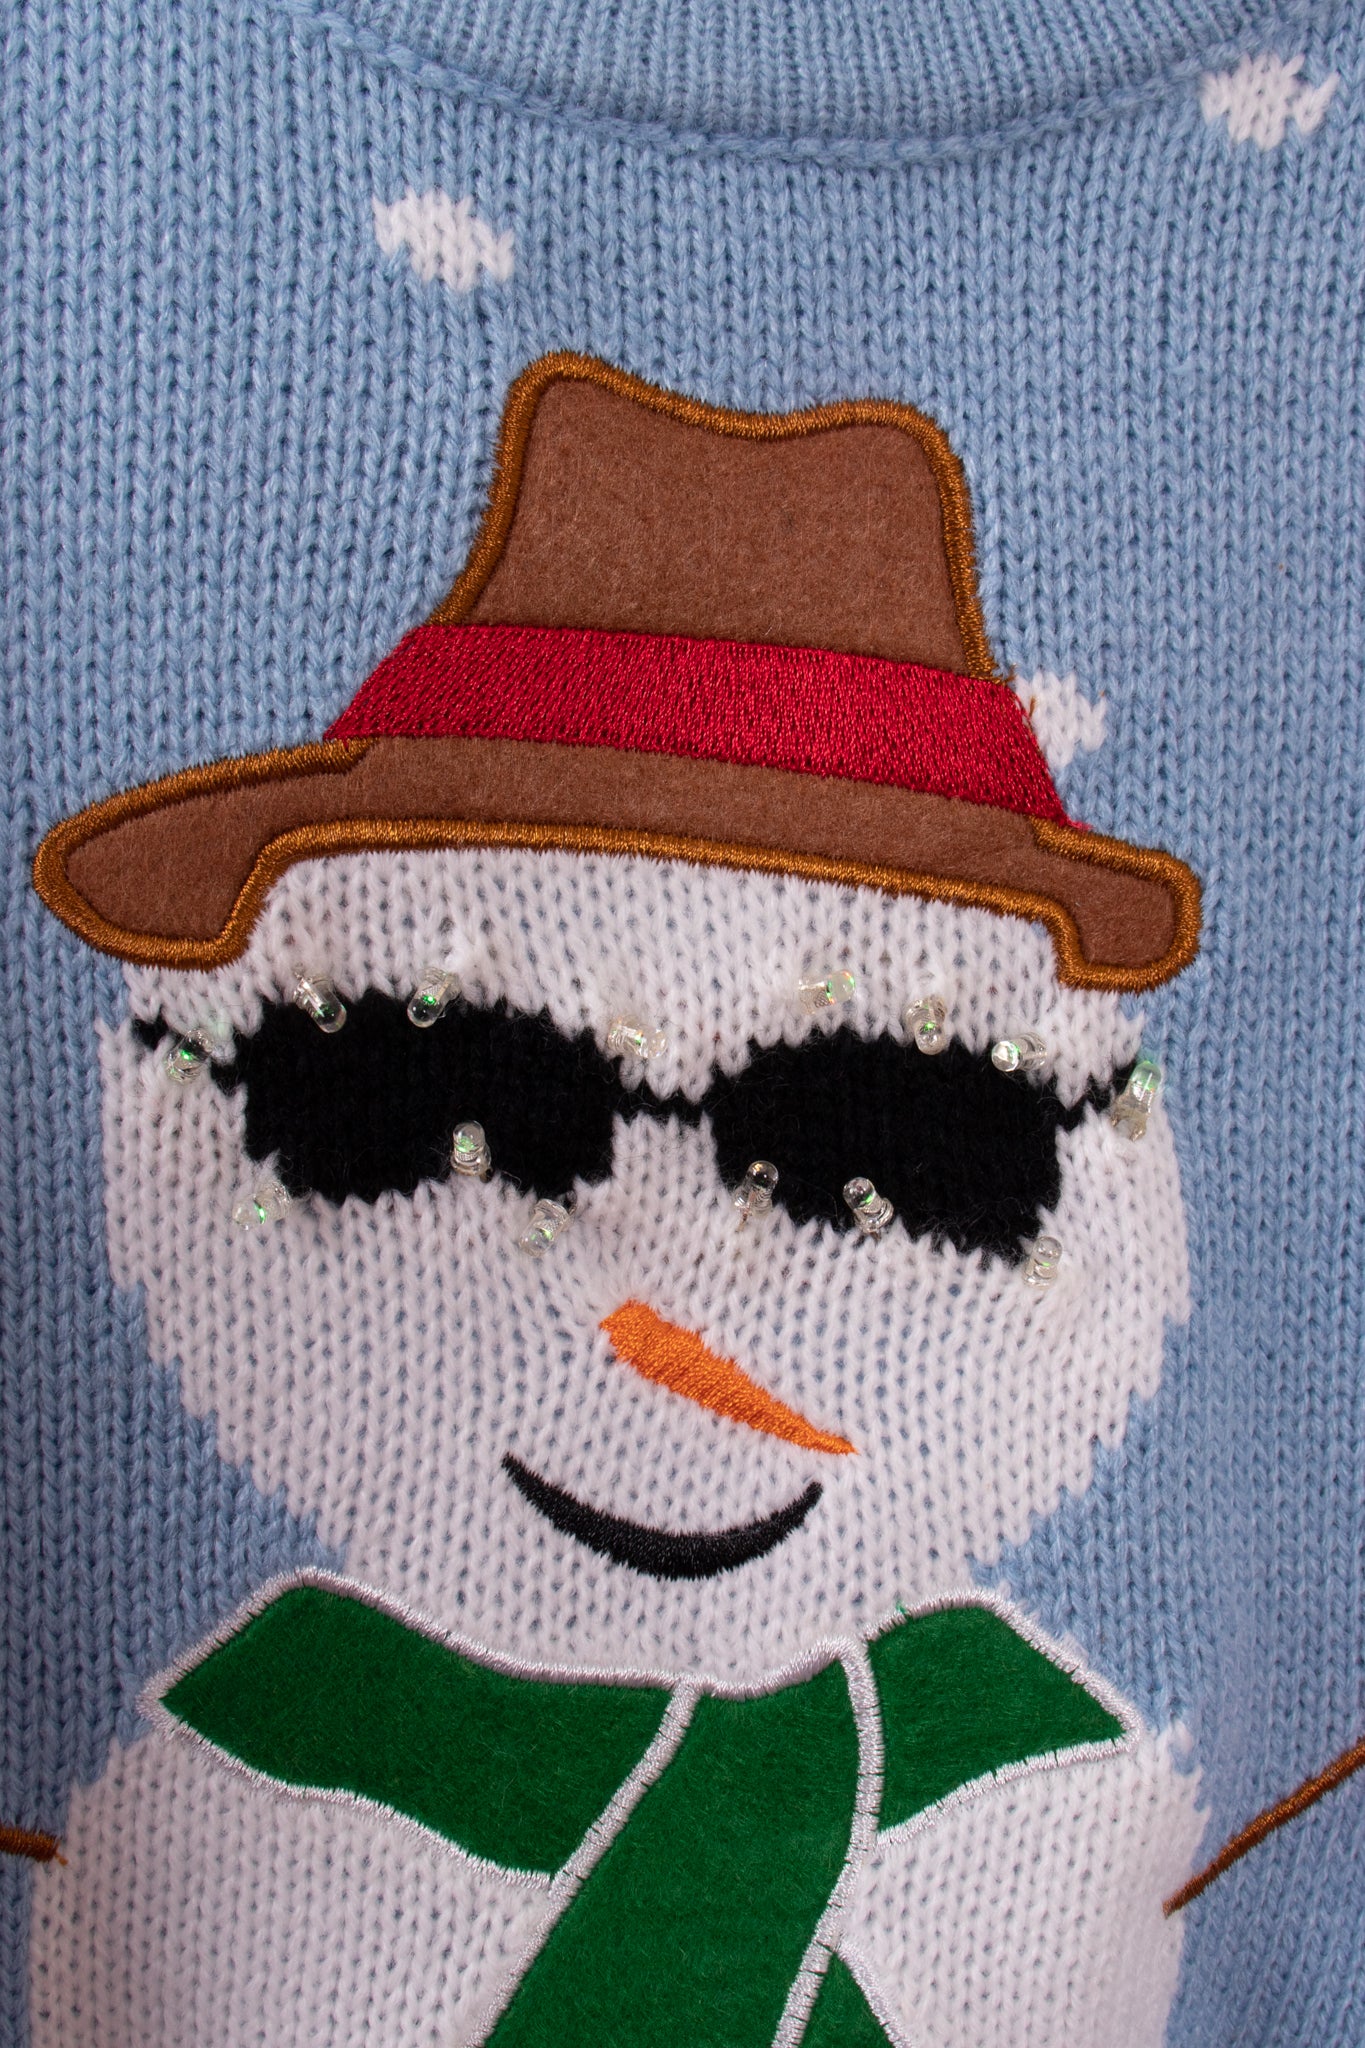 Cool Snowman Sweater with Lights